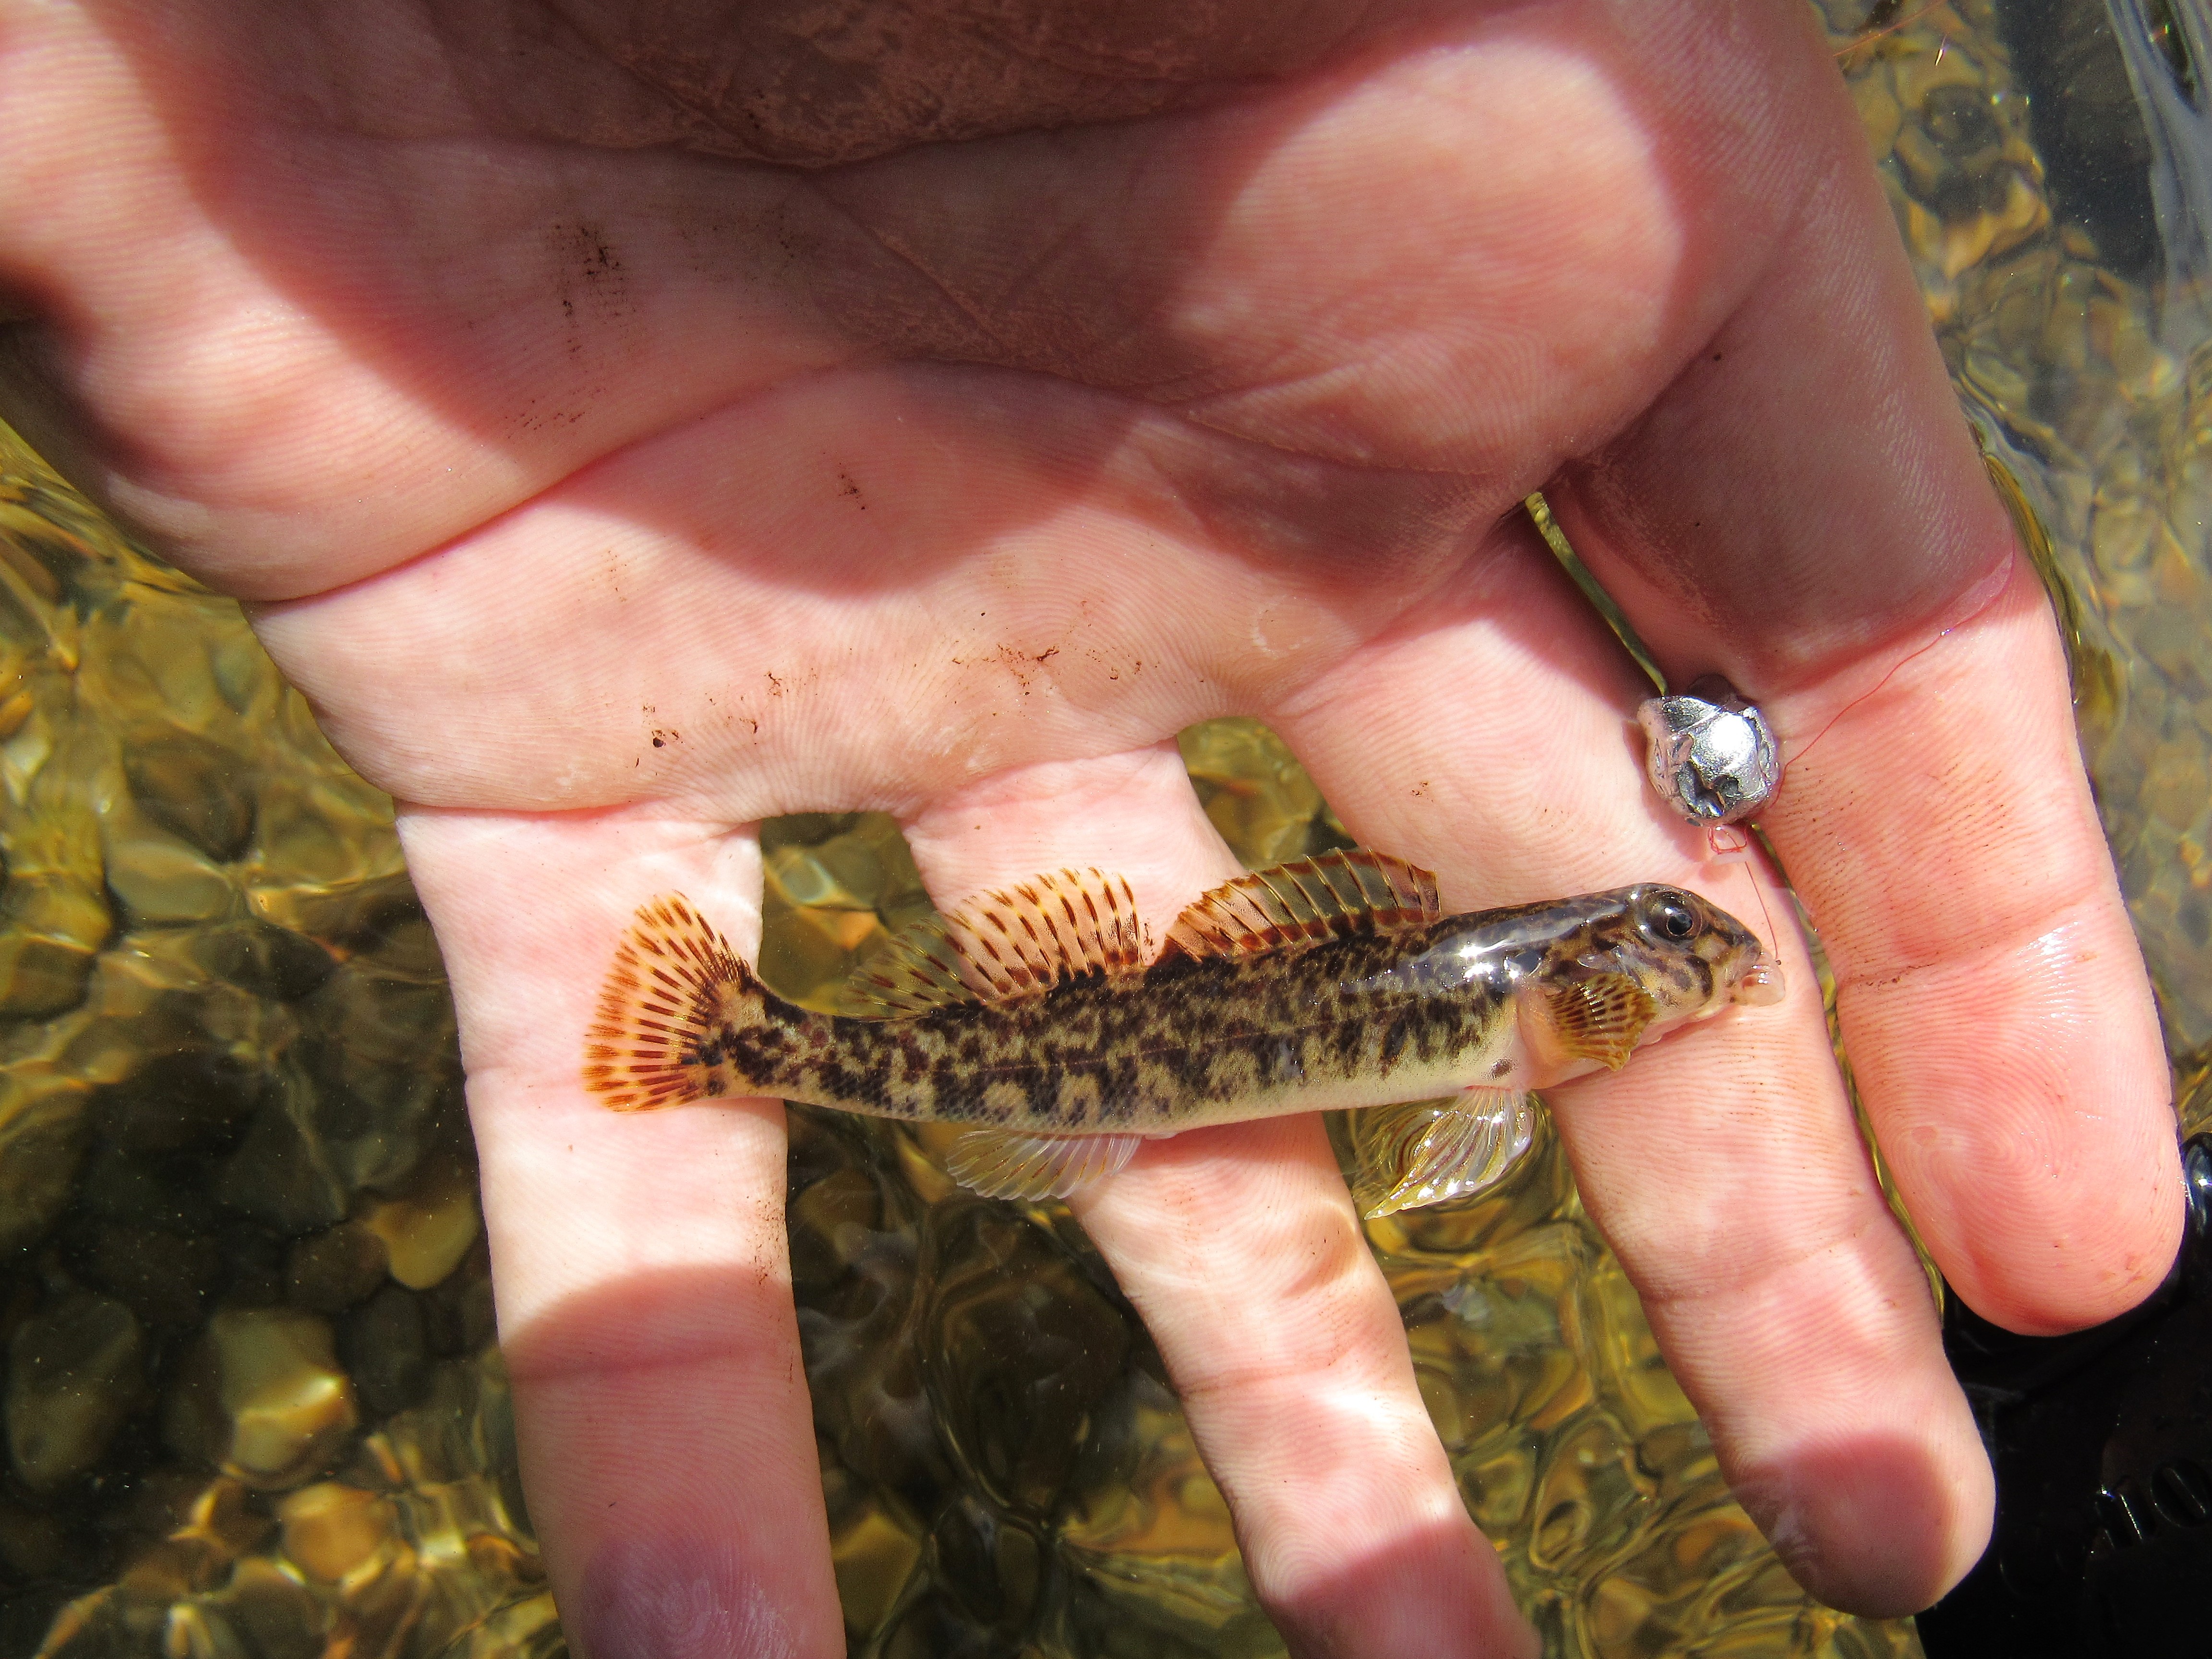 This is Micro-Fishing: Big Interest in Tiny Fish - Game & Fish